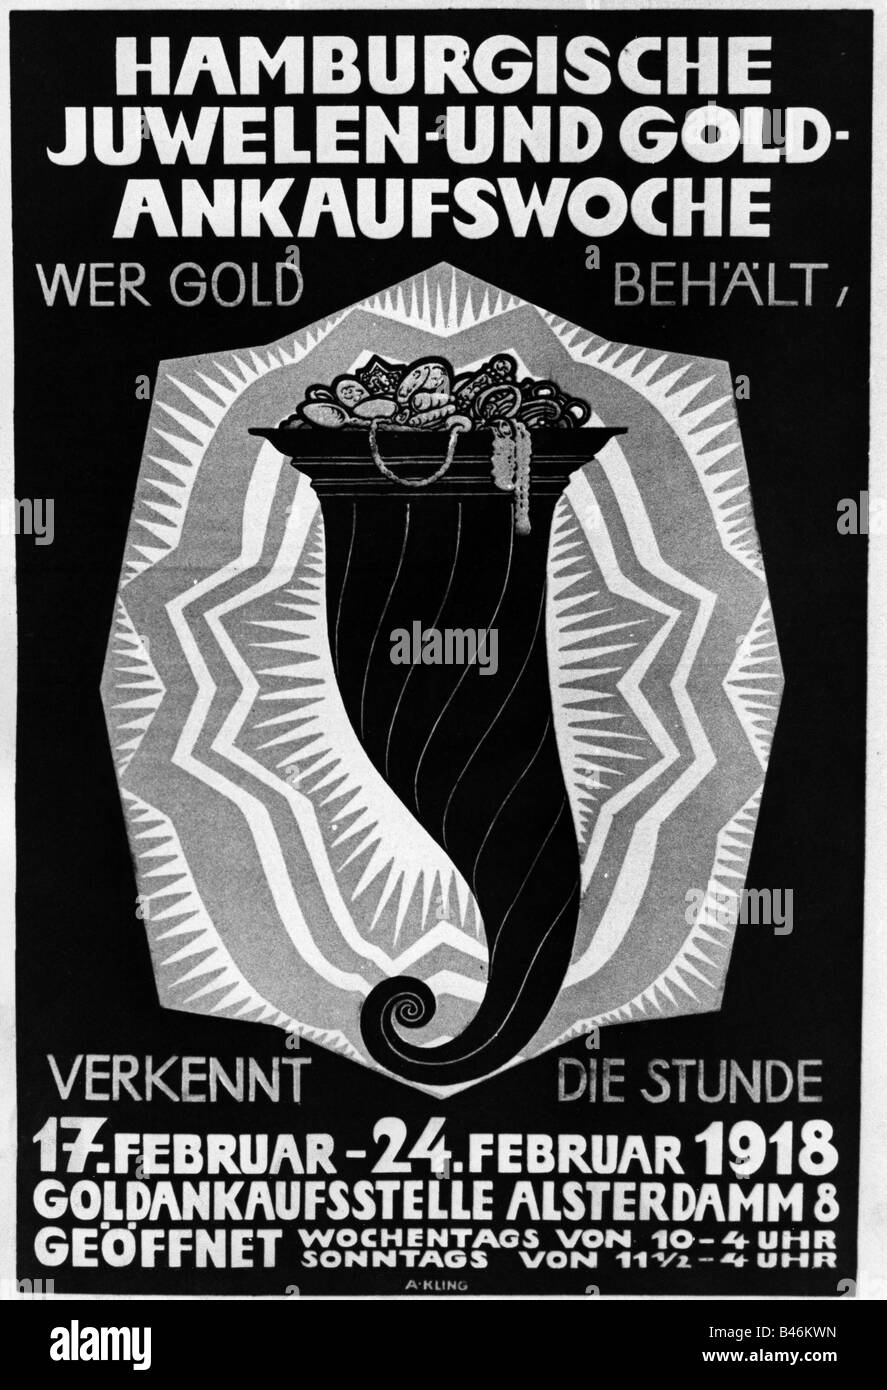 events, First World War / WWI, propaganda, poster, call to sell gold and jewels to the state, by A. Kling, Germany, 1918, Stock Photo